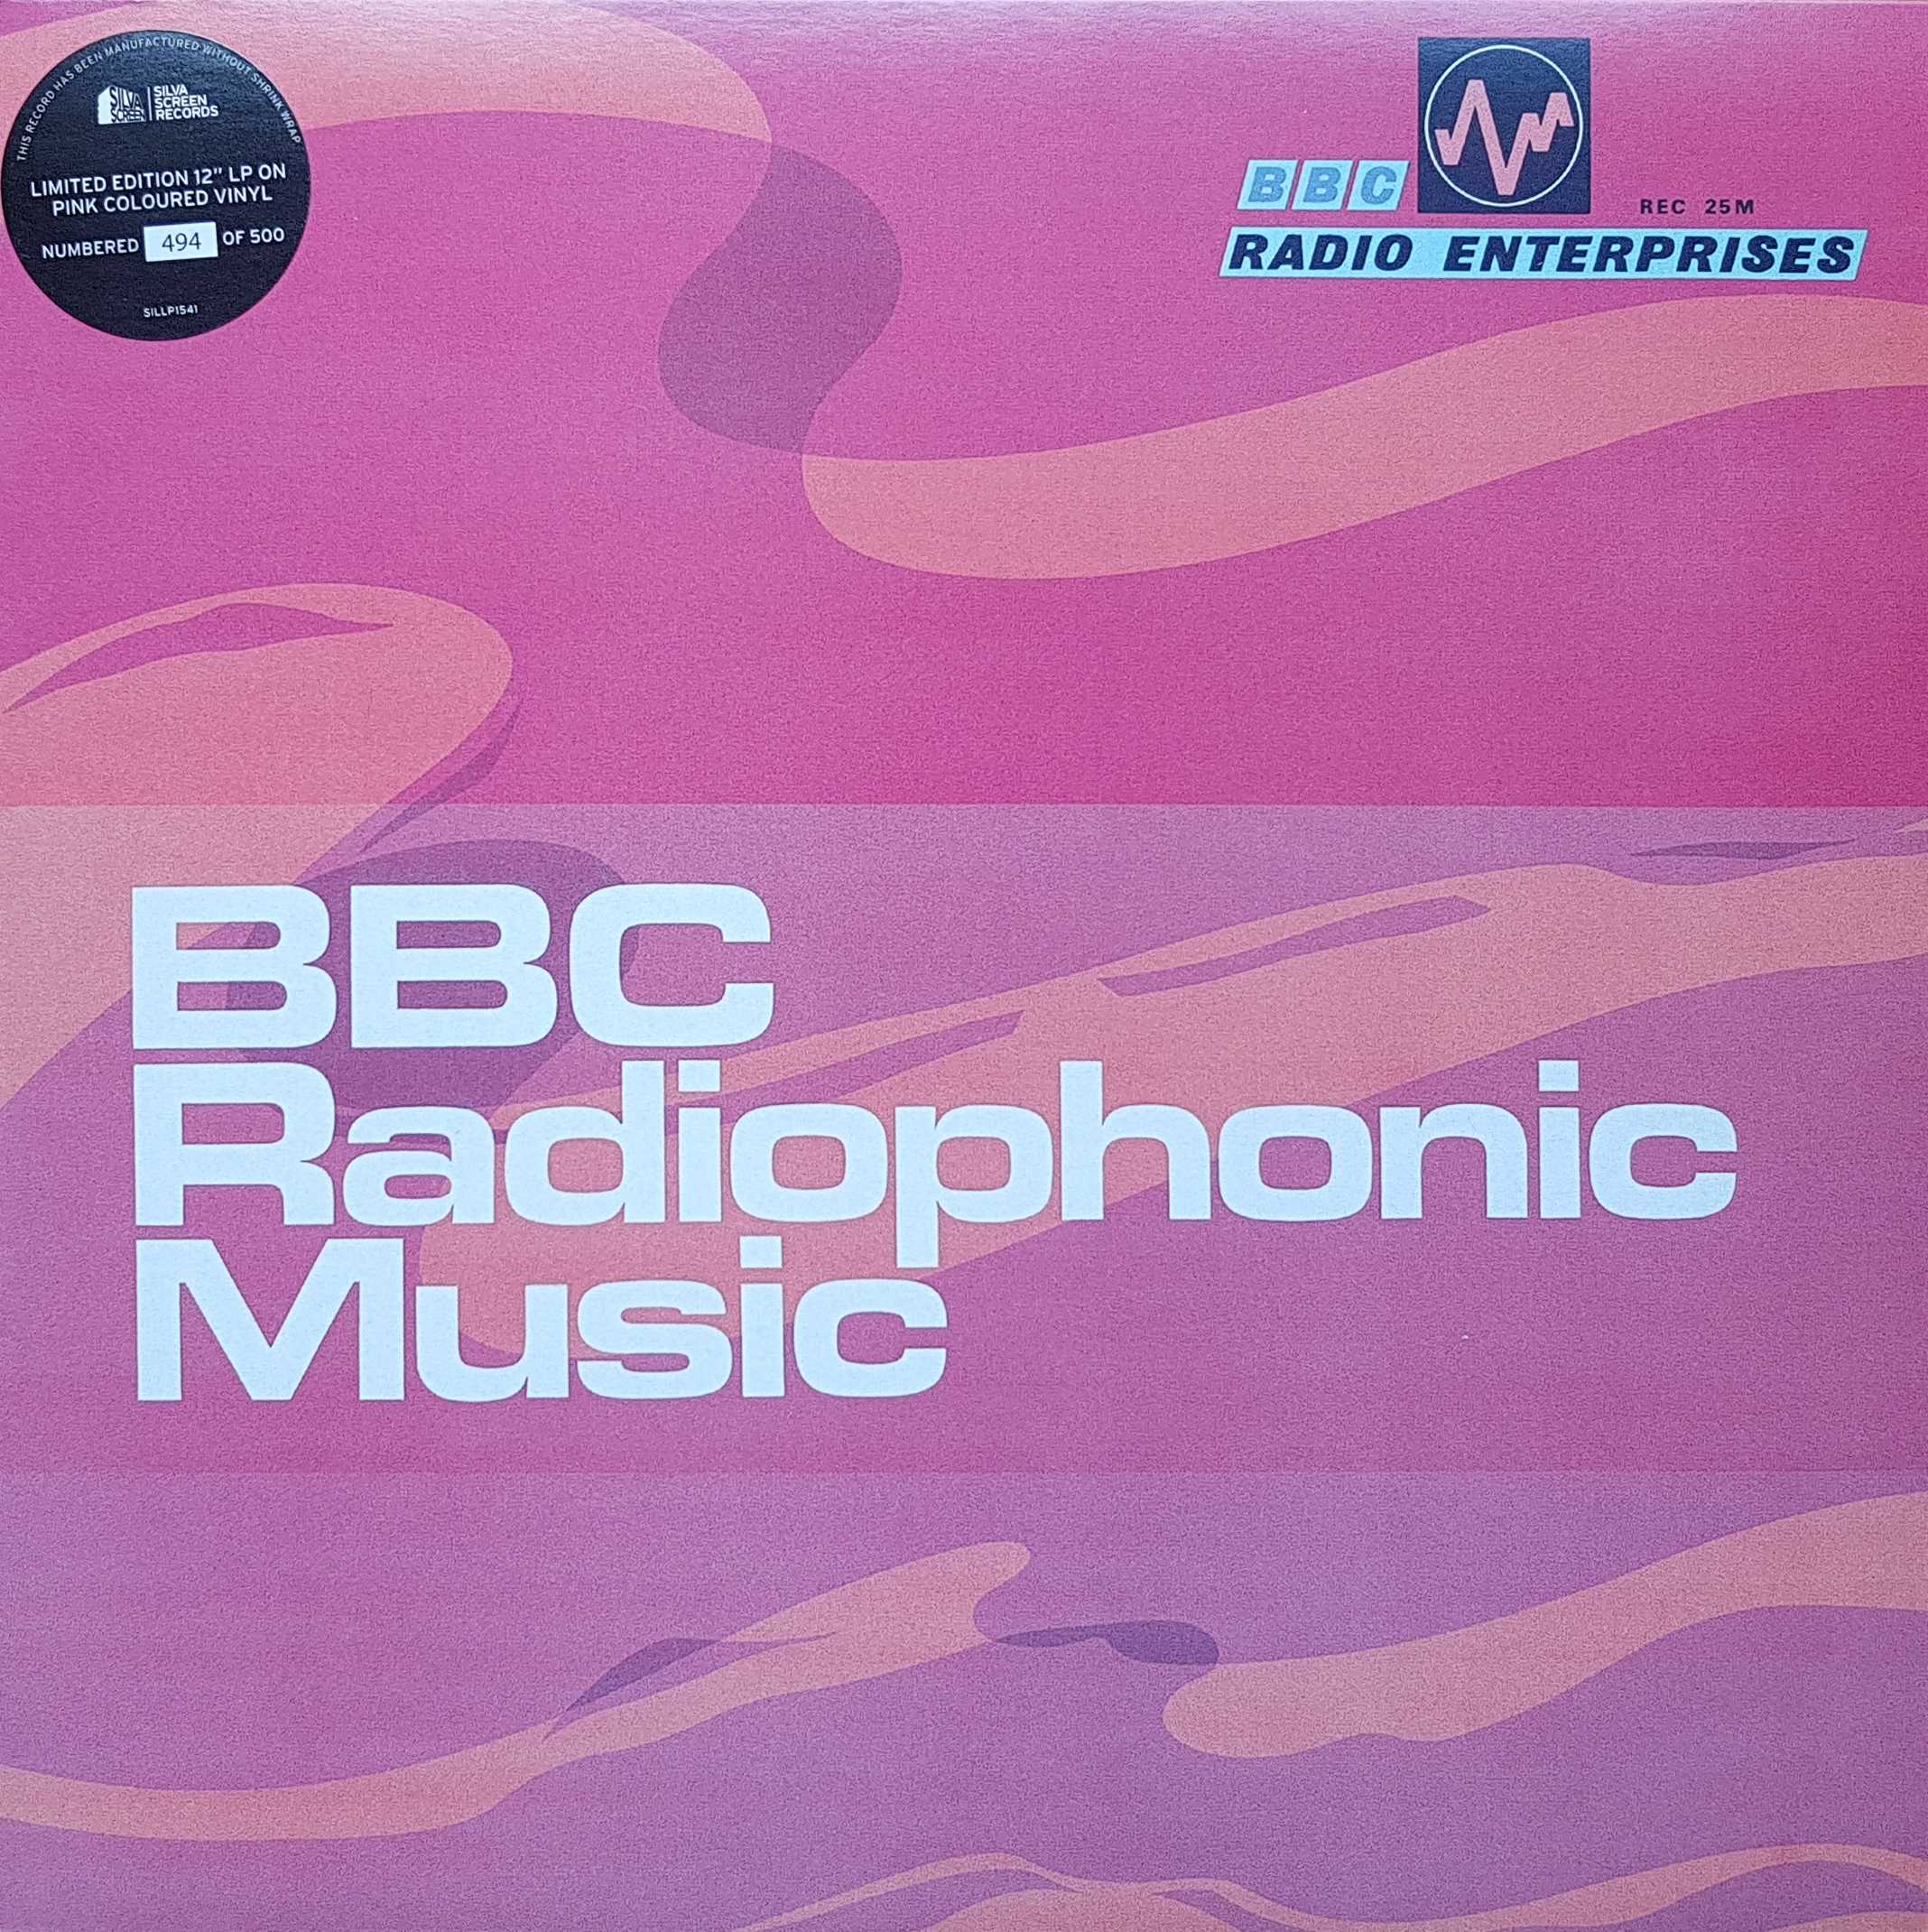 Picture of BBC Radiophonic Workshop by artist Various from the BBC albums - Records and Tapes library